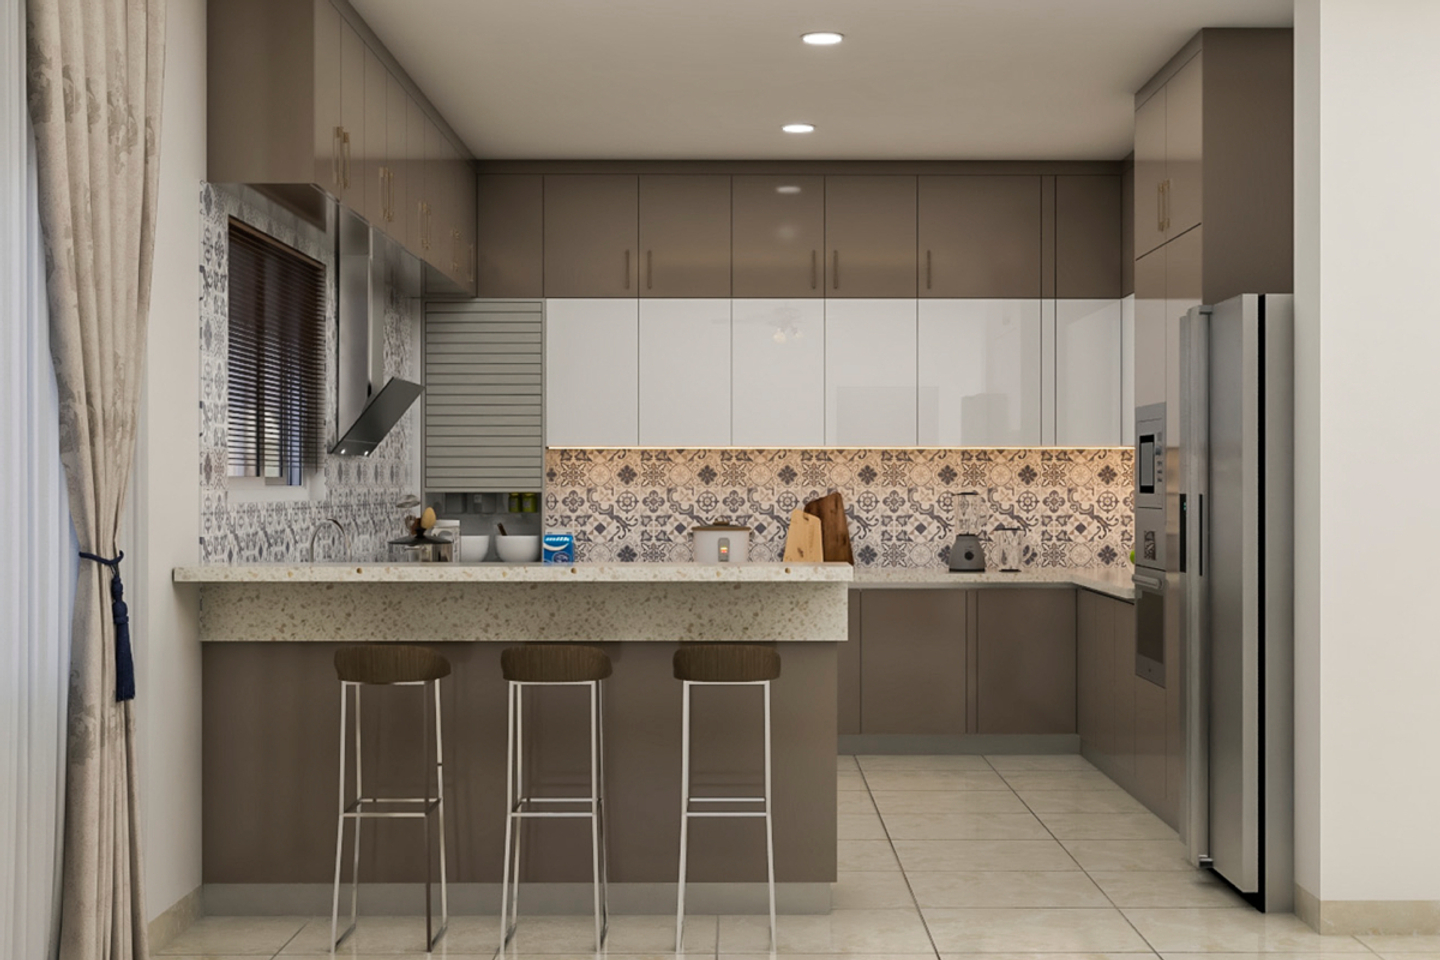 Modern Kitchen Interior Design With Floral Dado And Cove Lighting